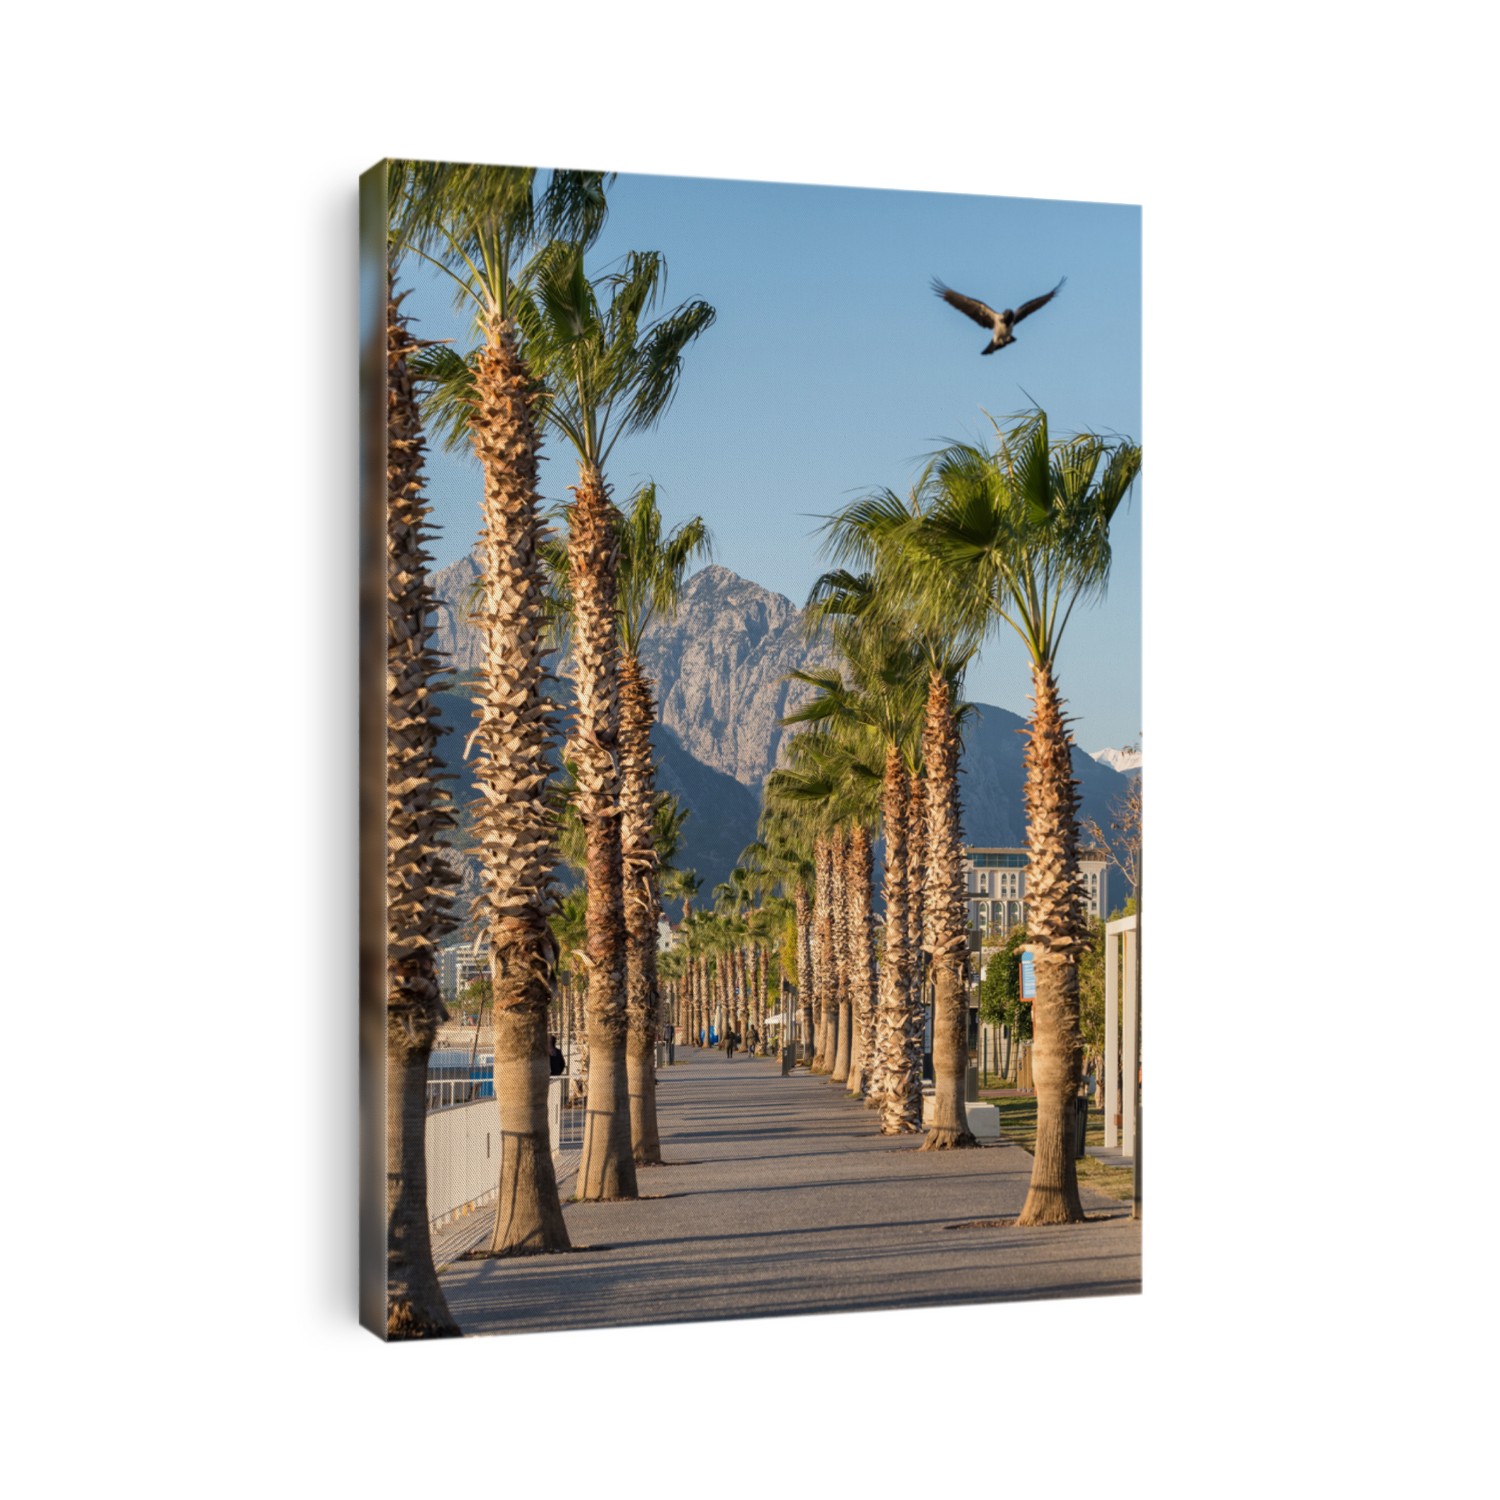 Antalya waterfront with palm trees and mountains at background in Turkey. Konyaalti beach promenade in the morning